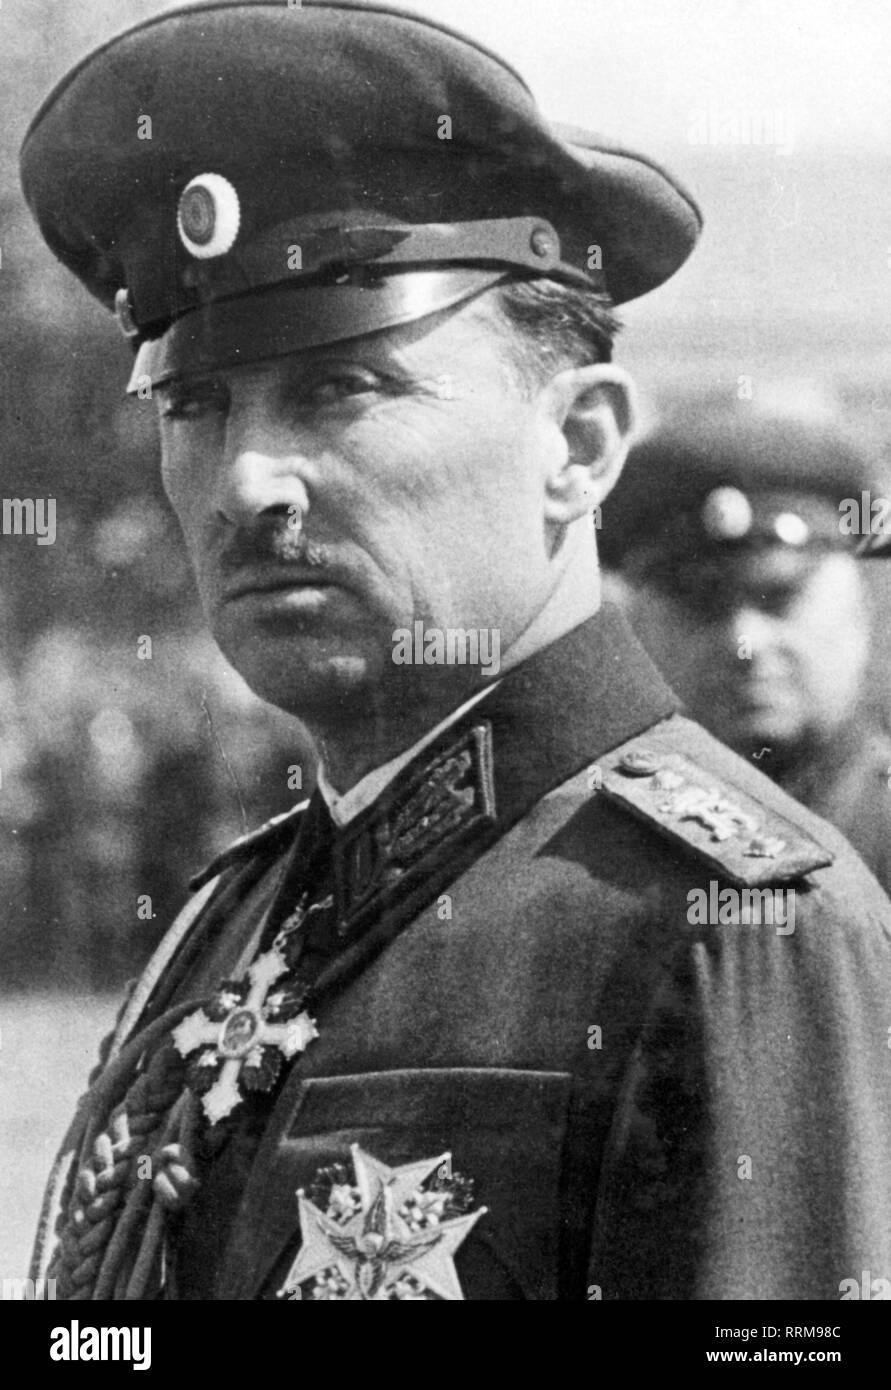 Kyril, 17.11.1895 - 1.2.1945, prince of Bulgaria, chairman of the regency counsel 28.8.1943 - 9.9.1944, portrait, 1943, Additional-Rights-Clearance-Info-Not-Available Stock Photo